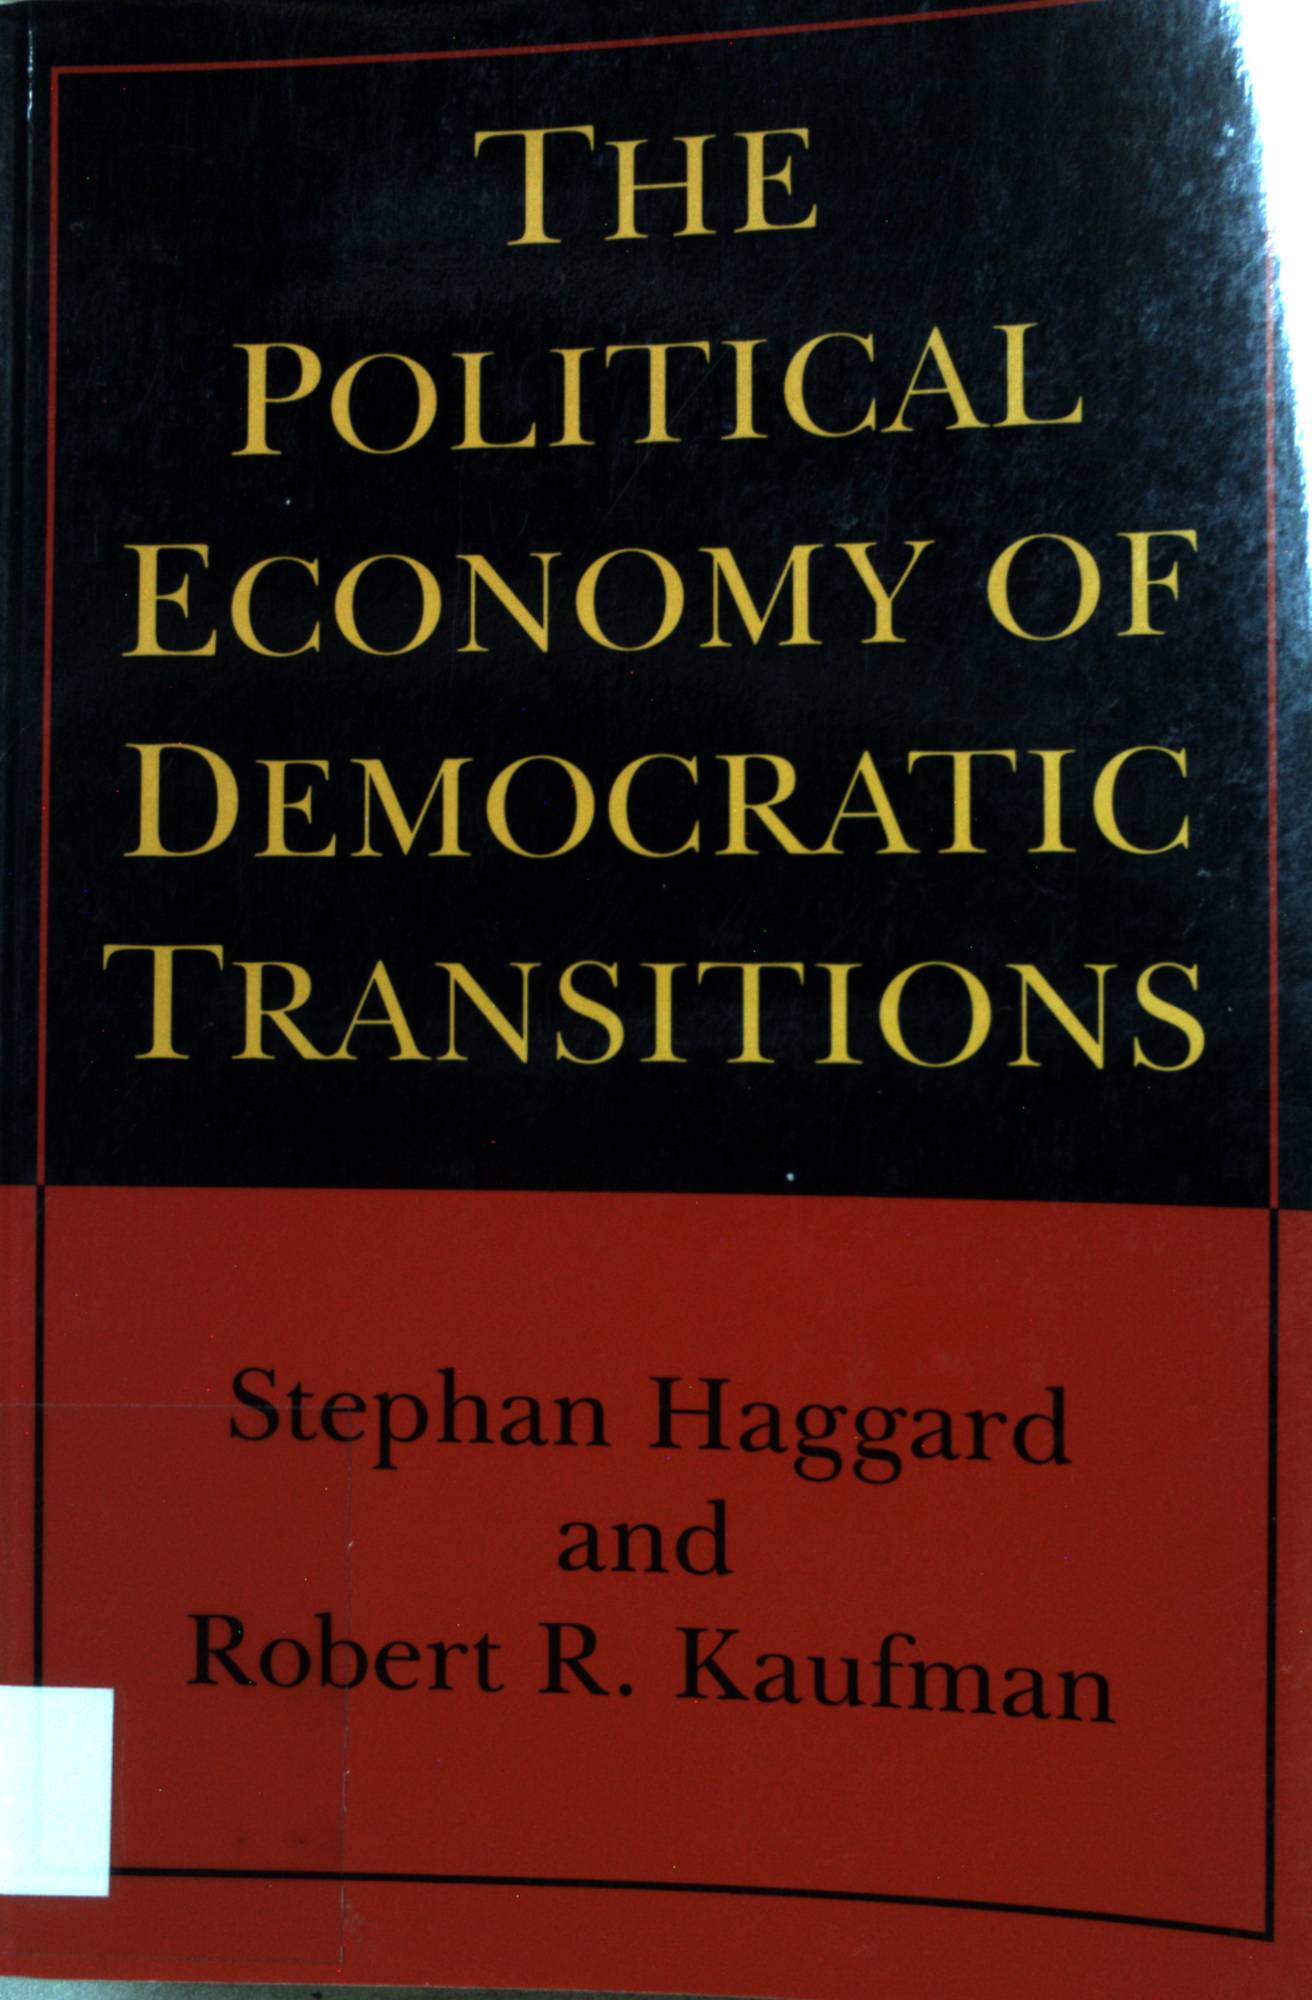 The Political Economy of Democratic Transitions. - Haggard, Stephan